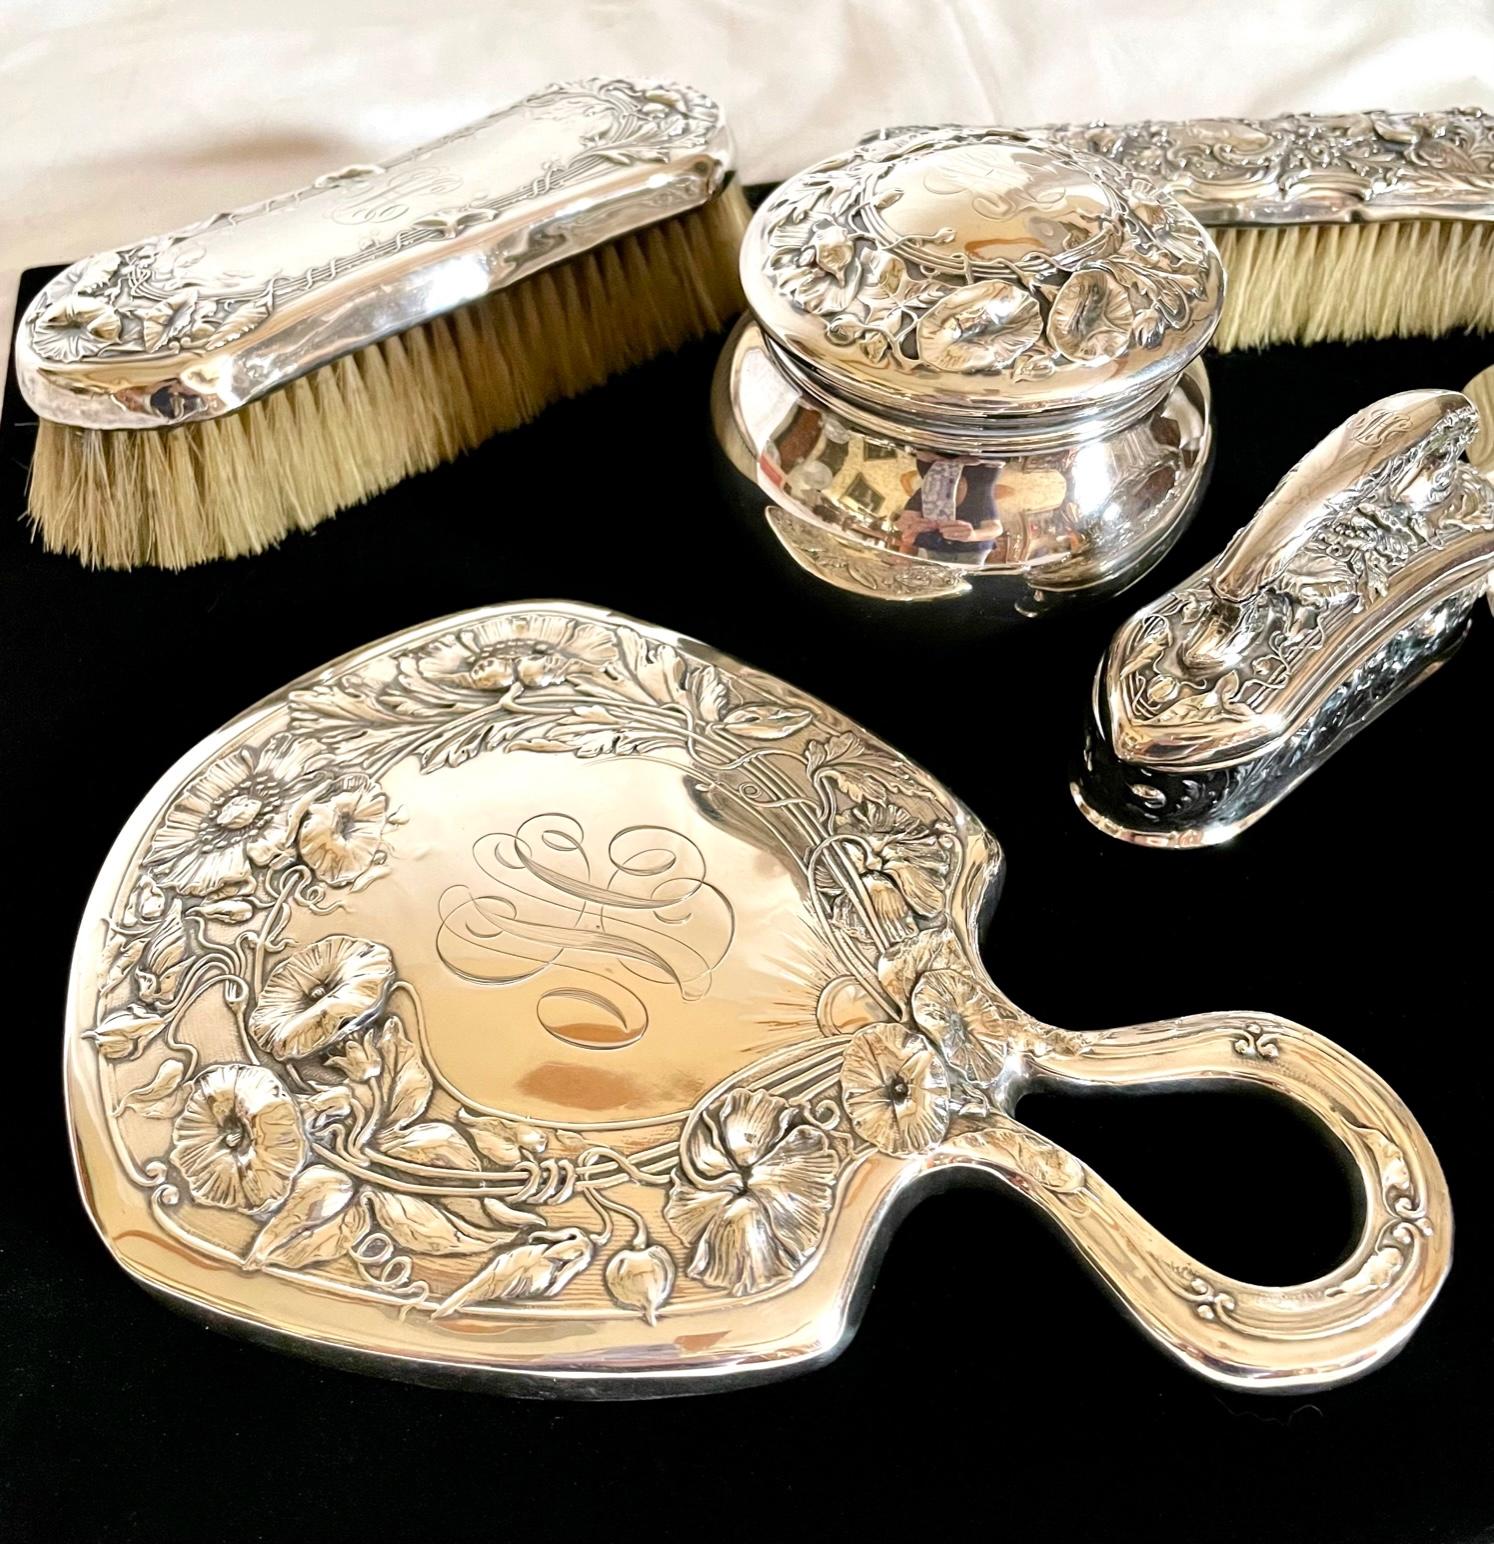 19th century Gorham Art Nouveau sterling silver Vanity set, 7 pieces.

This stunning Art Nouveau sterling silver set is imaginatively created by Gorham. Each piece, as part of the matching set, abounds in glorious Art Nouveau embossed features